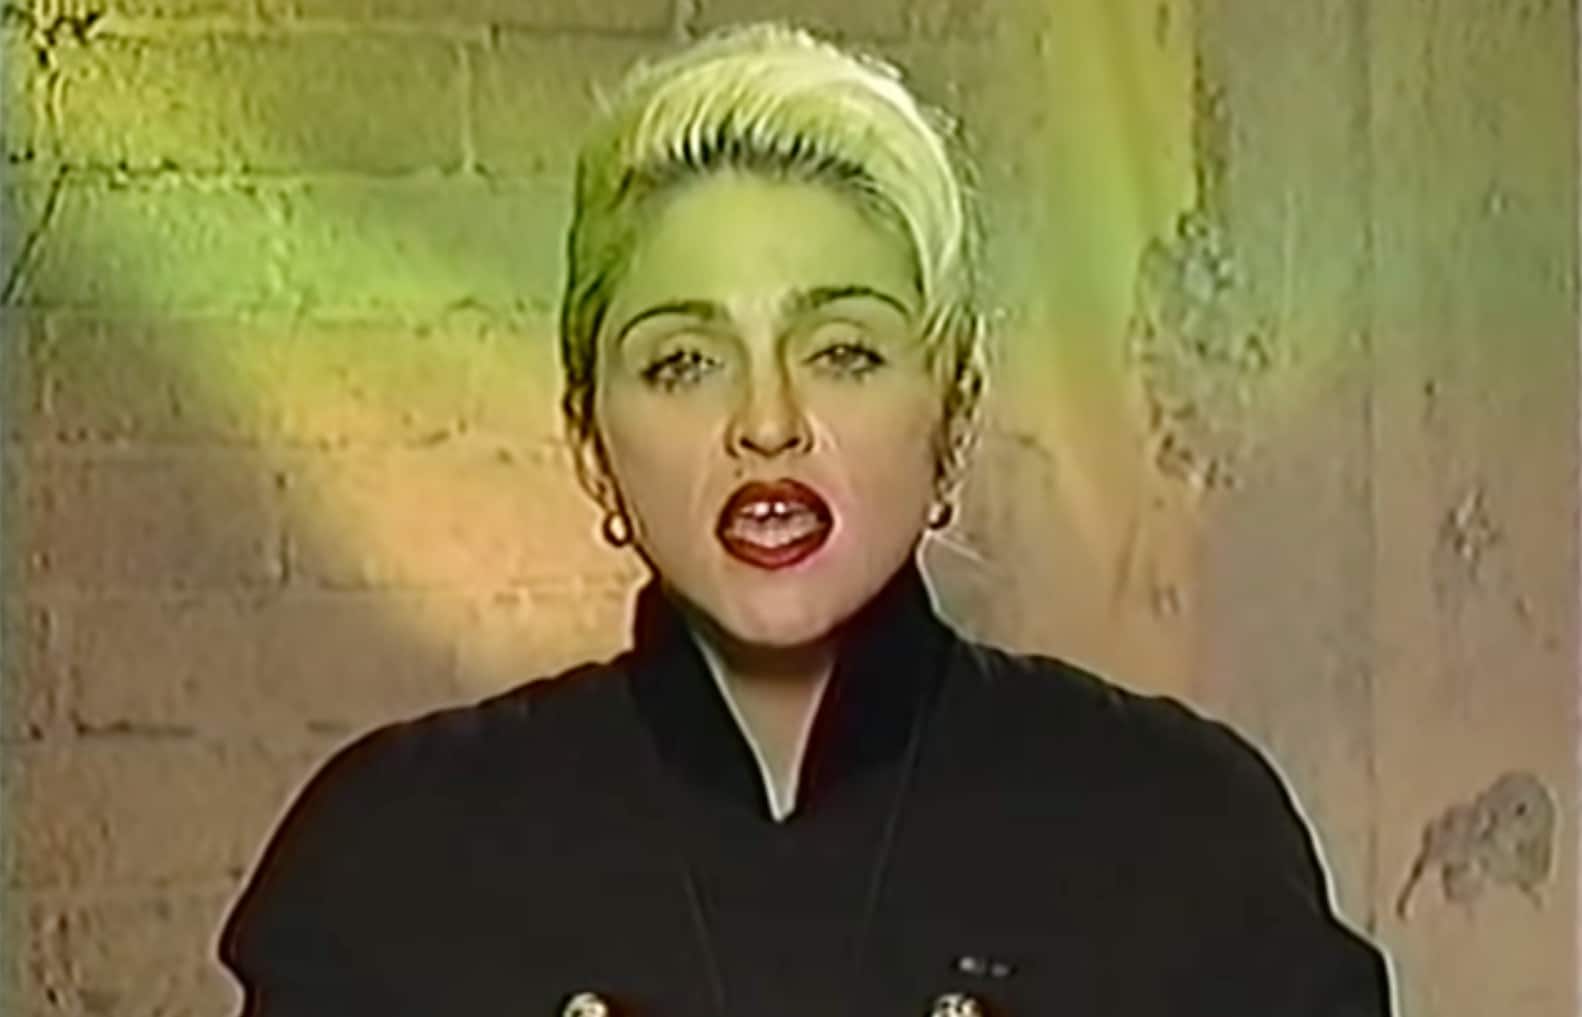 Madonna Sex Video Skacat - Madonna expertly dissects sex and sexuality in 1990 Nightline interview